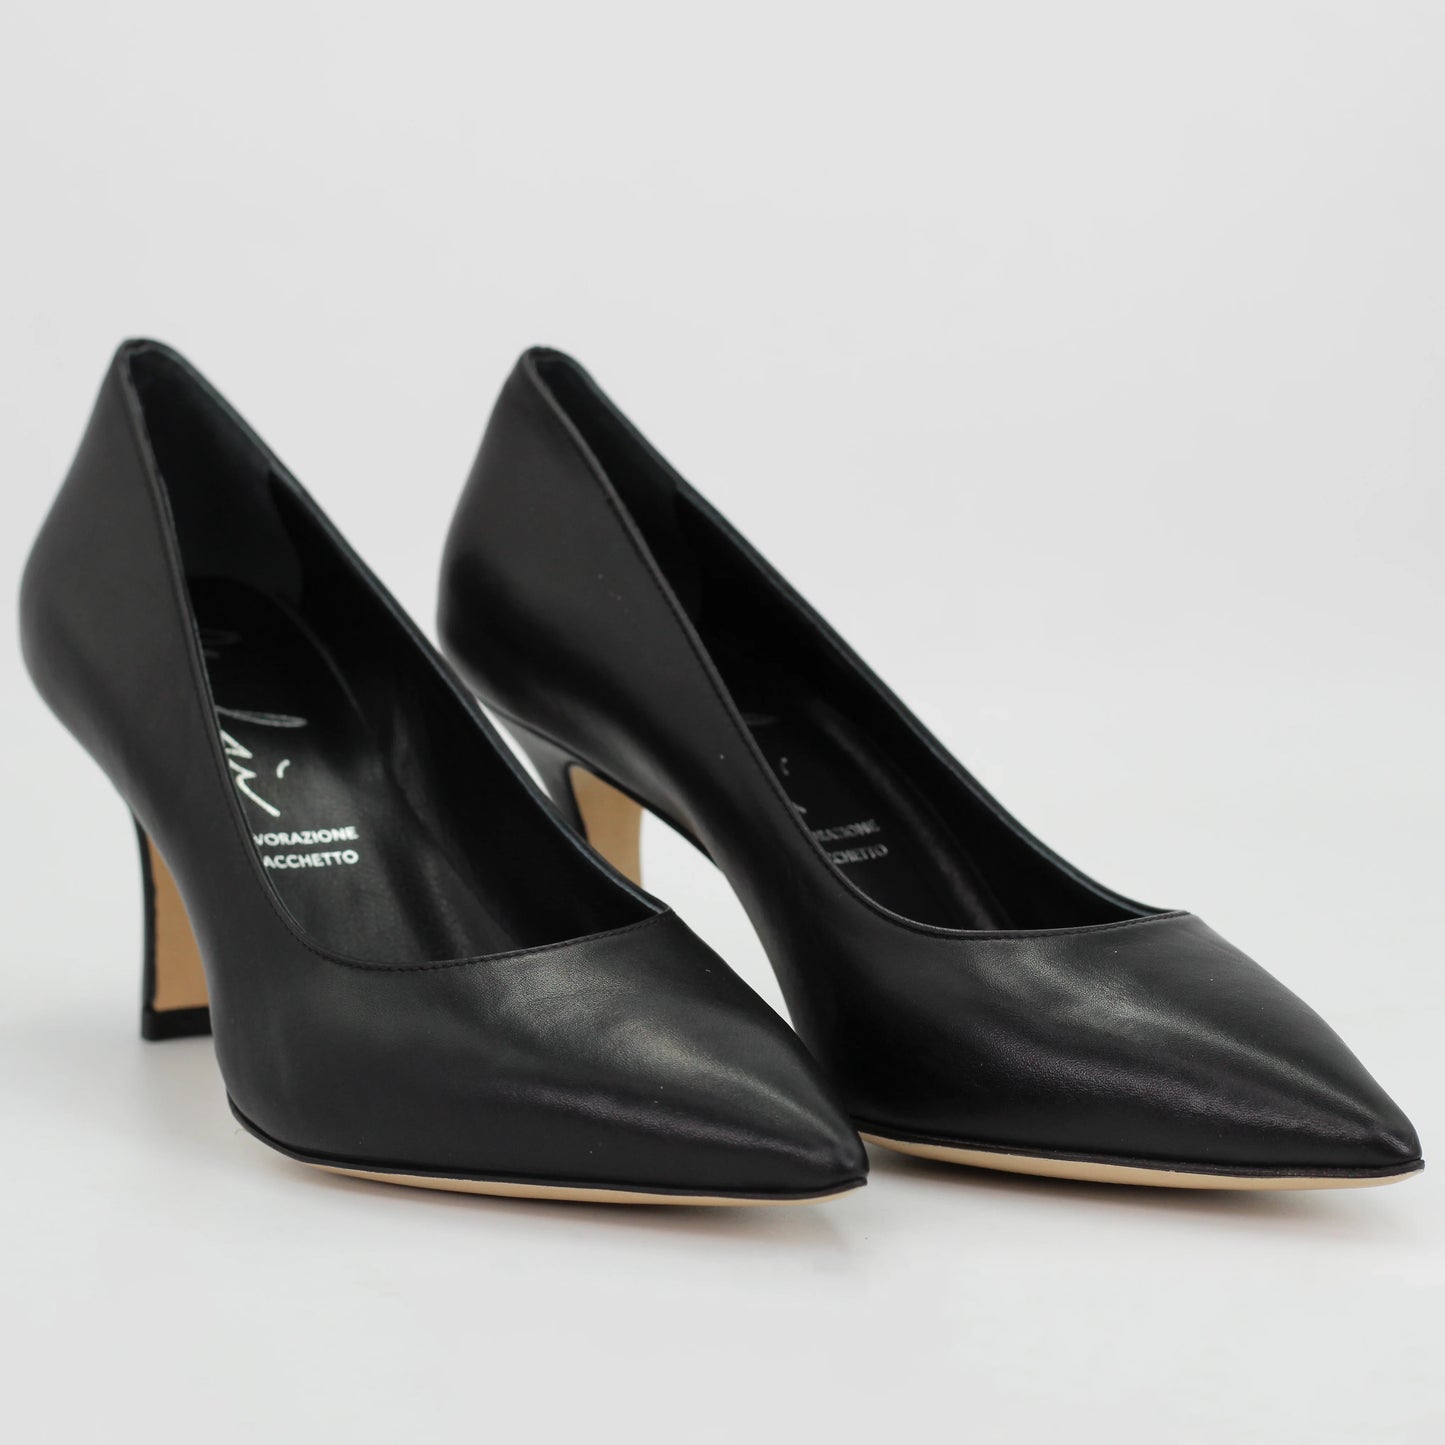 Shop Handmade Italian Leather court heel in black (MA3771) or browse our range of hand-made Italian shoes in leather or suede in-store at Aliverti Cape Town, or shop online. We deliver in South Africa & offer multiple payment plans as well as accept multiple safe & secure payment methods.